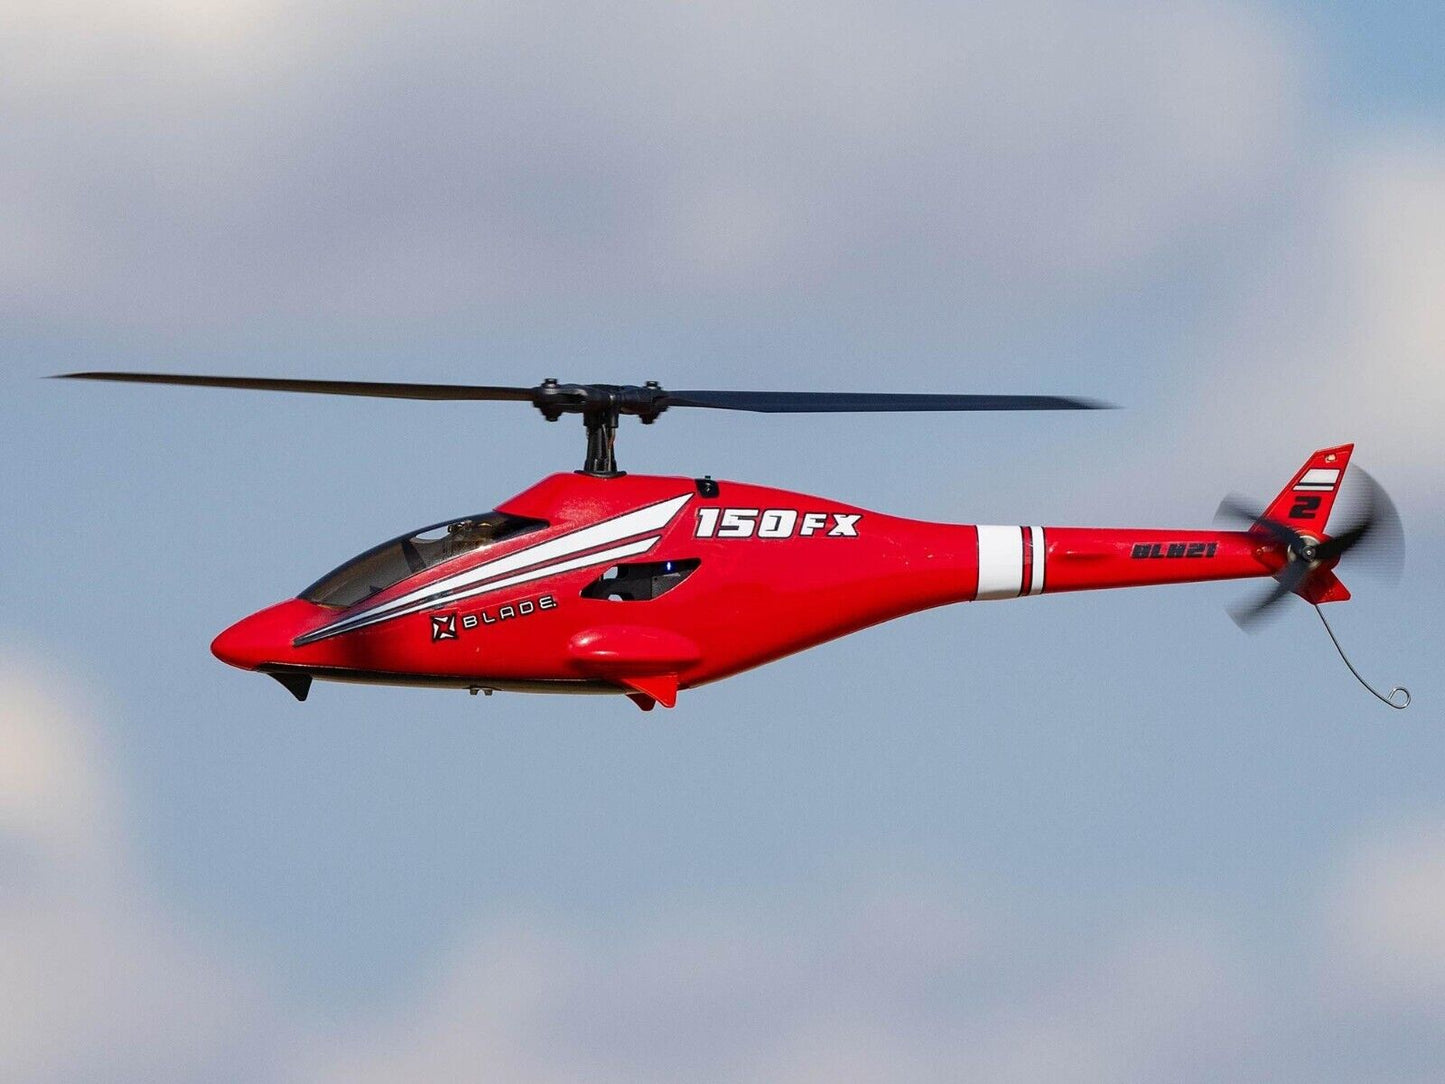 Blade 150 FX RTF RC Helicopter